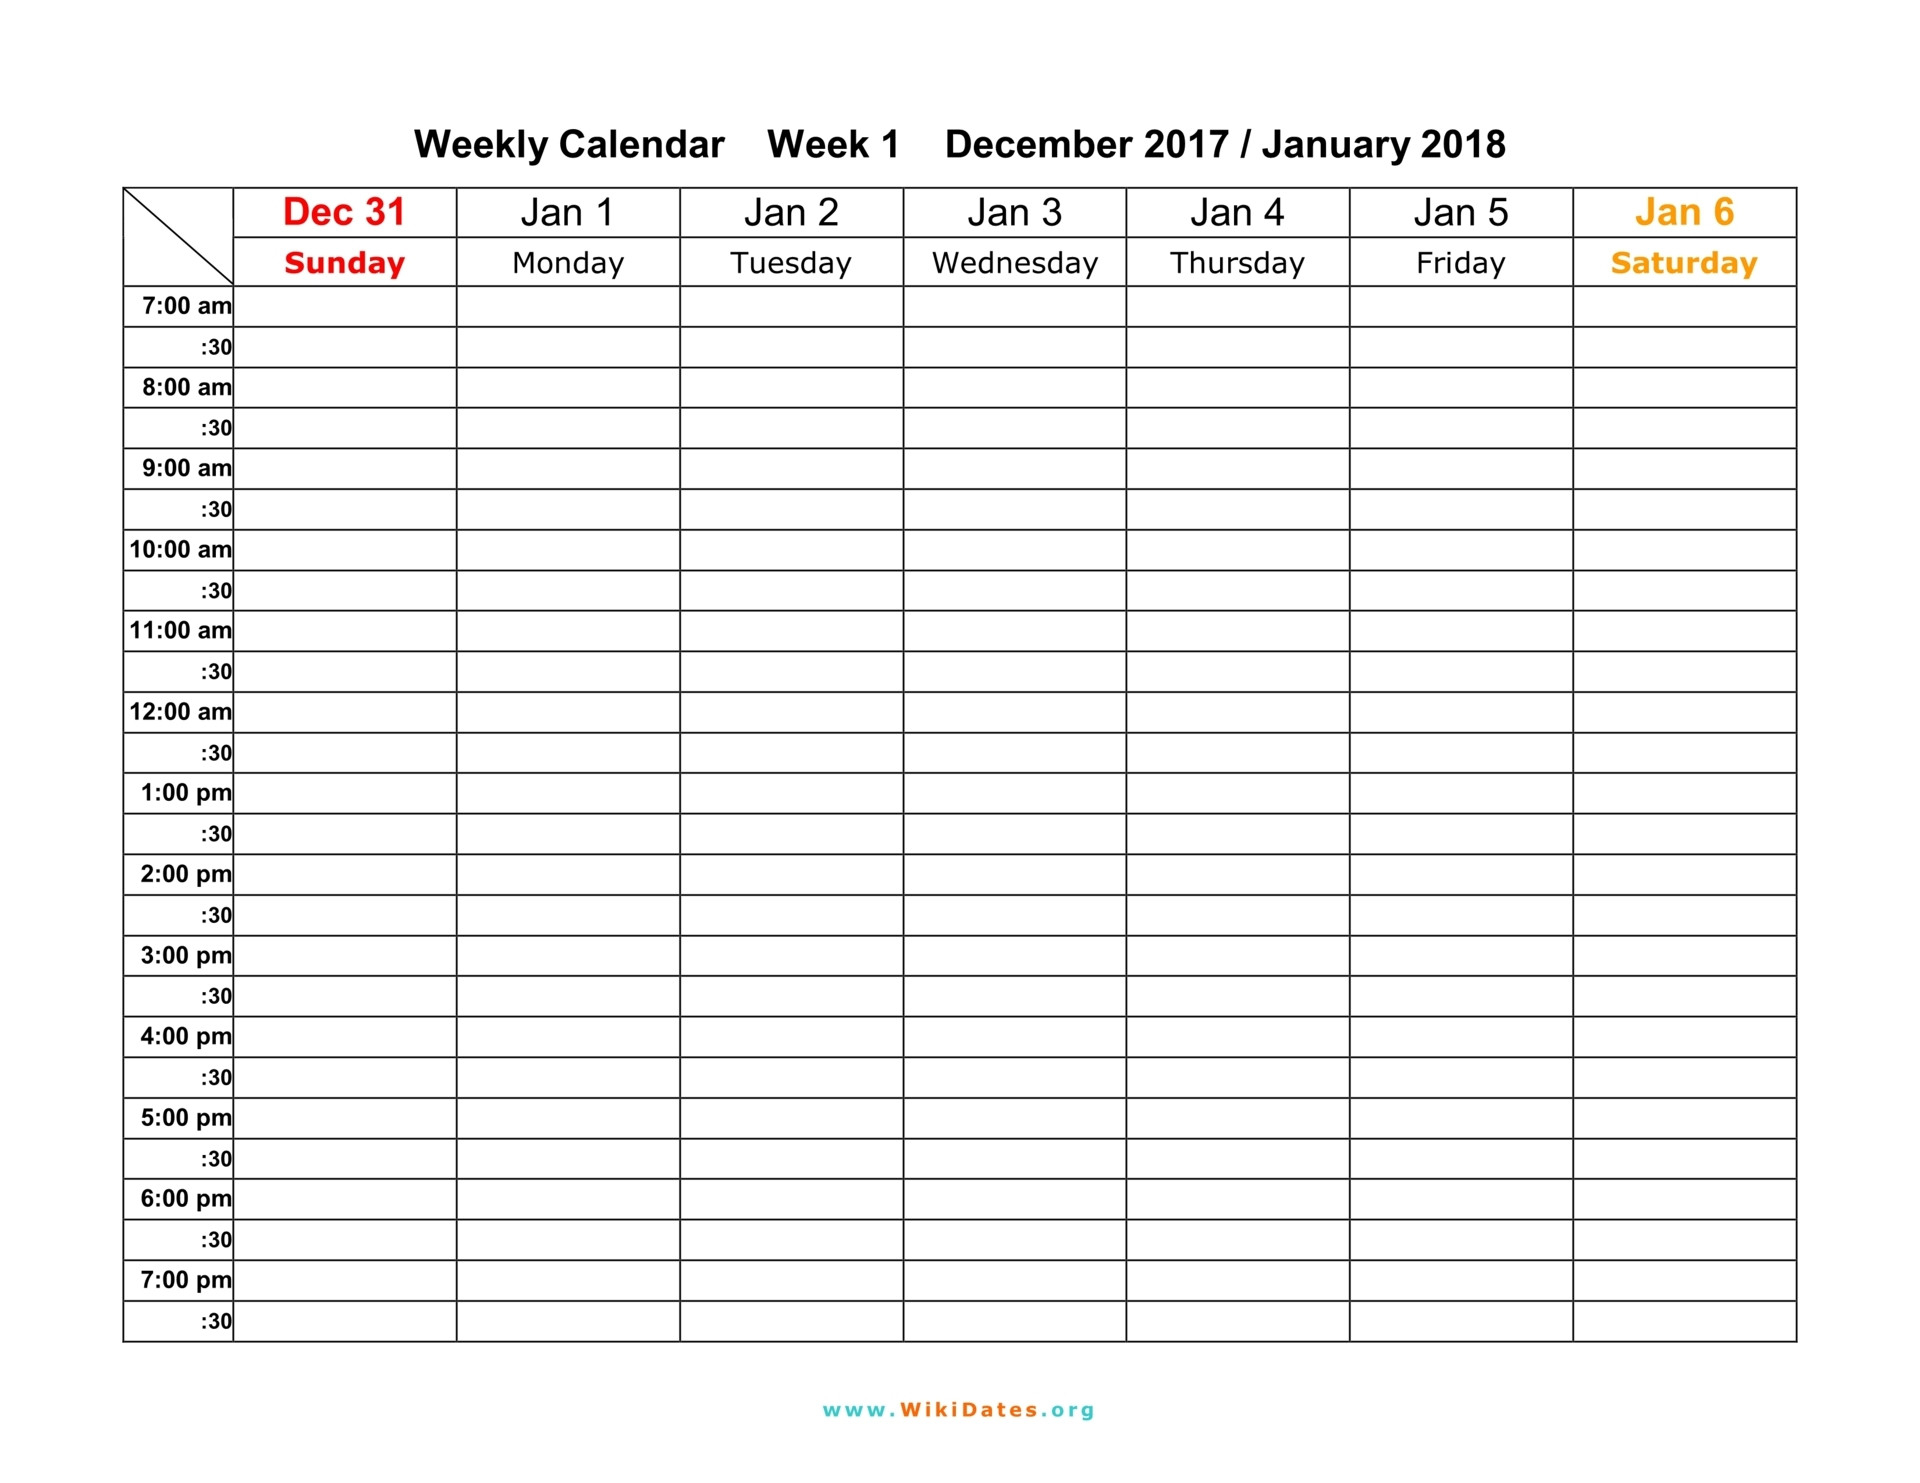 Weekly Calendar - Download Weekly Calendar 2017 And 2018  Weekly Or Monthly Calendar With Times